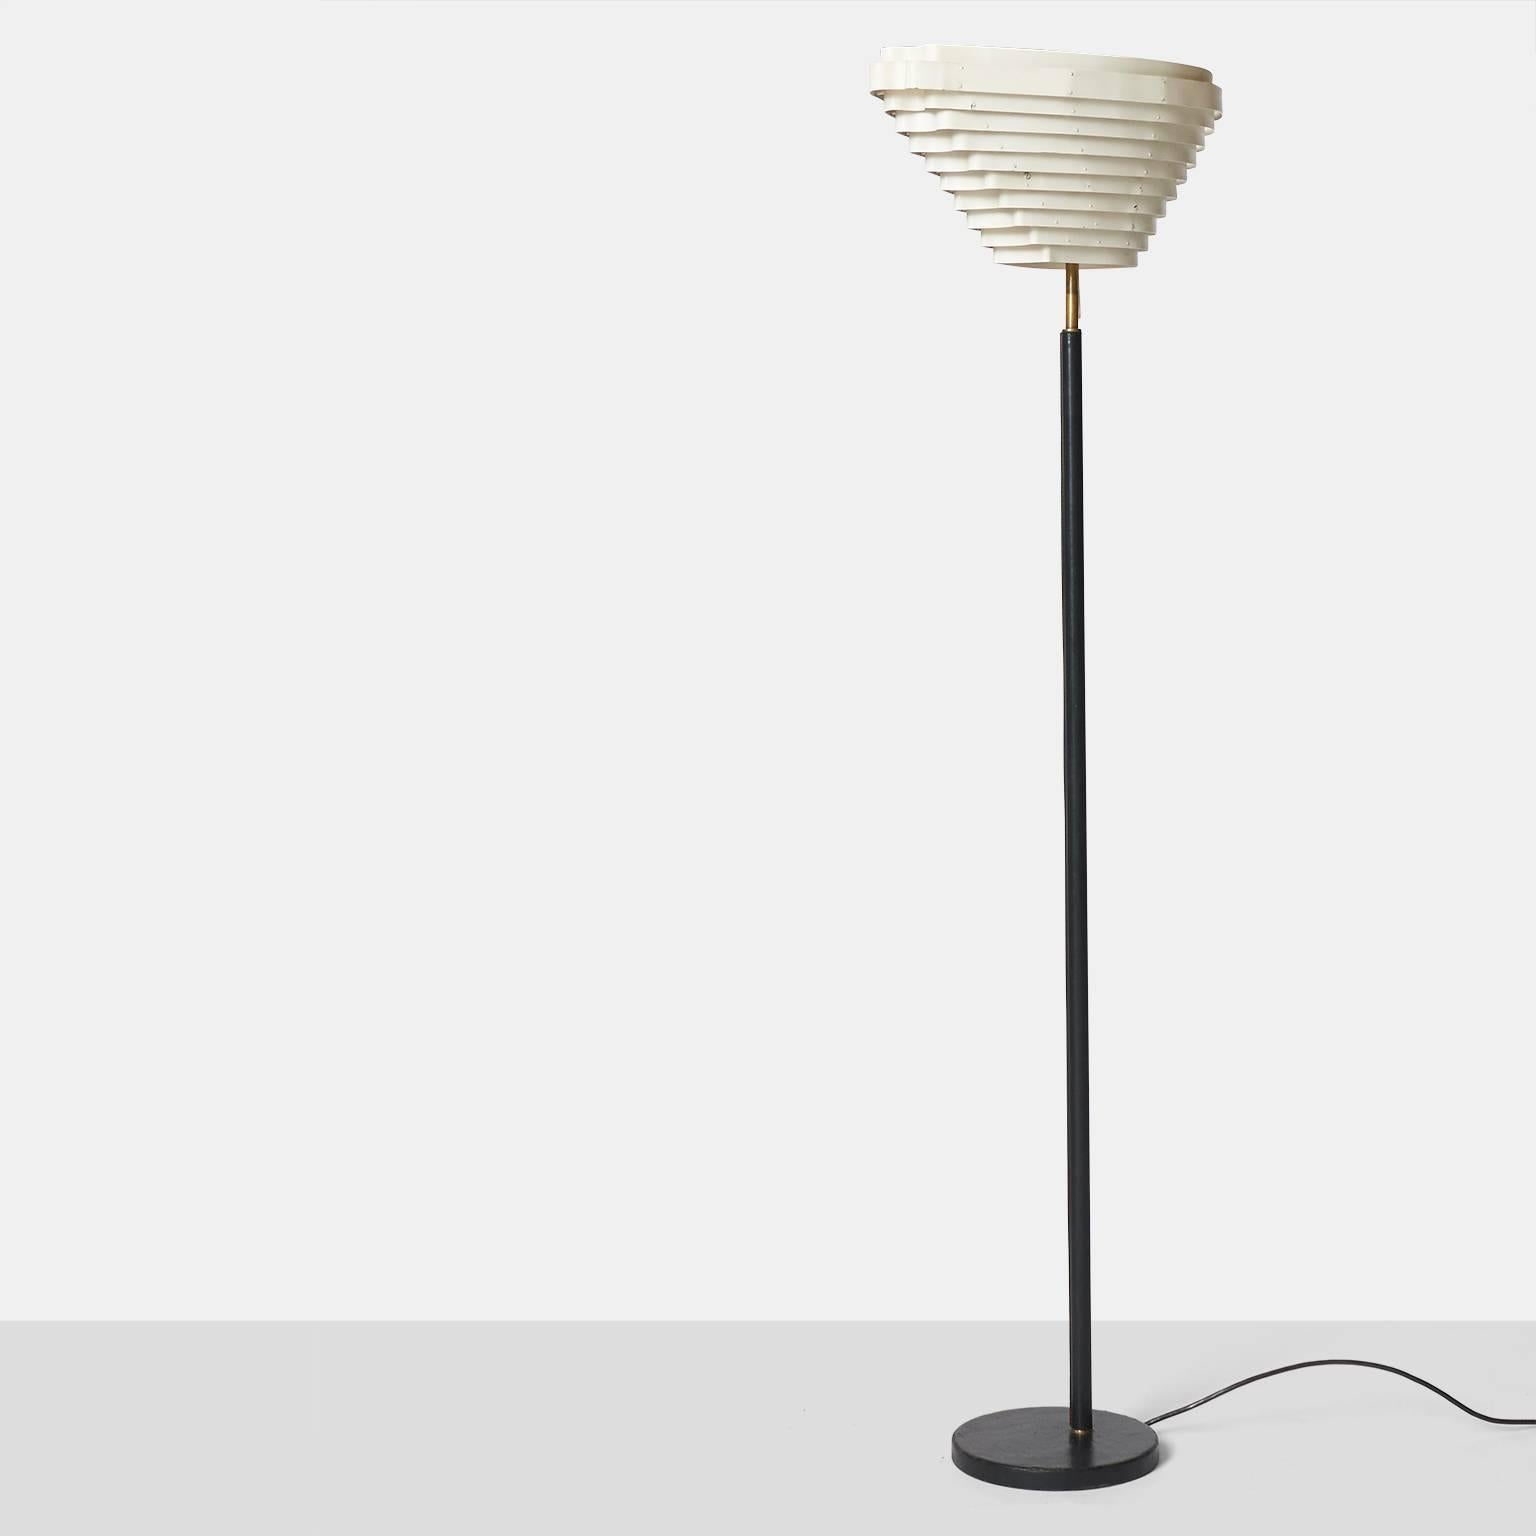 A floor lamp model #A805 by Alvar Aalto for Valaisinpaia. The base and stem have been wrapped in hand-sewn black leather with a white enameled metal shade. Nick named the Angel lamp for the asymmetrical shape of the shade.

  